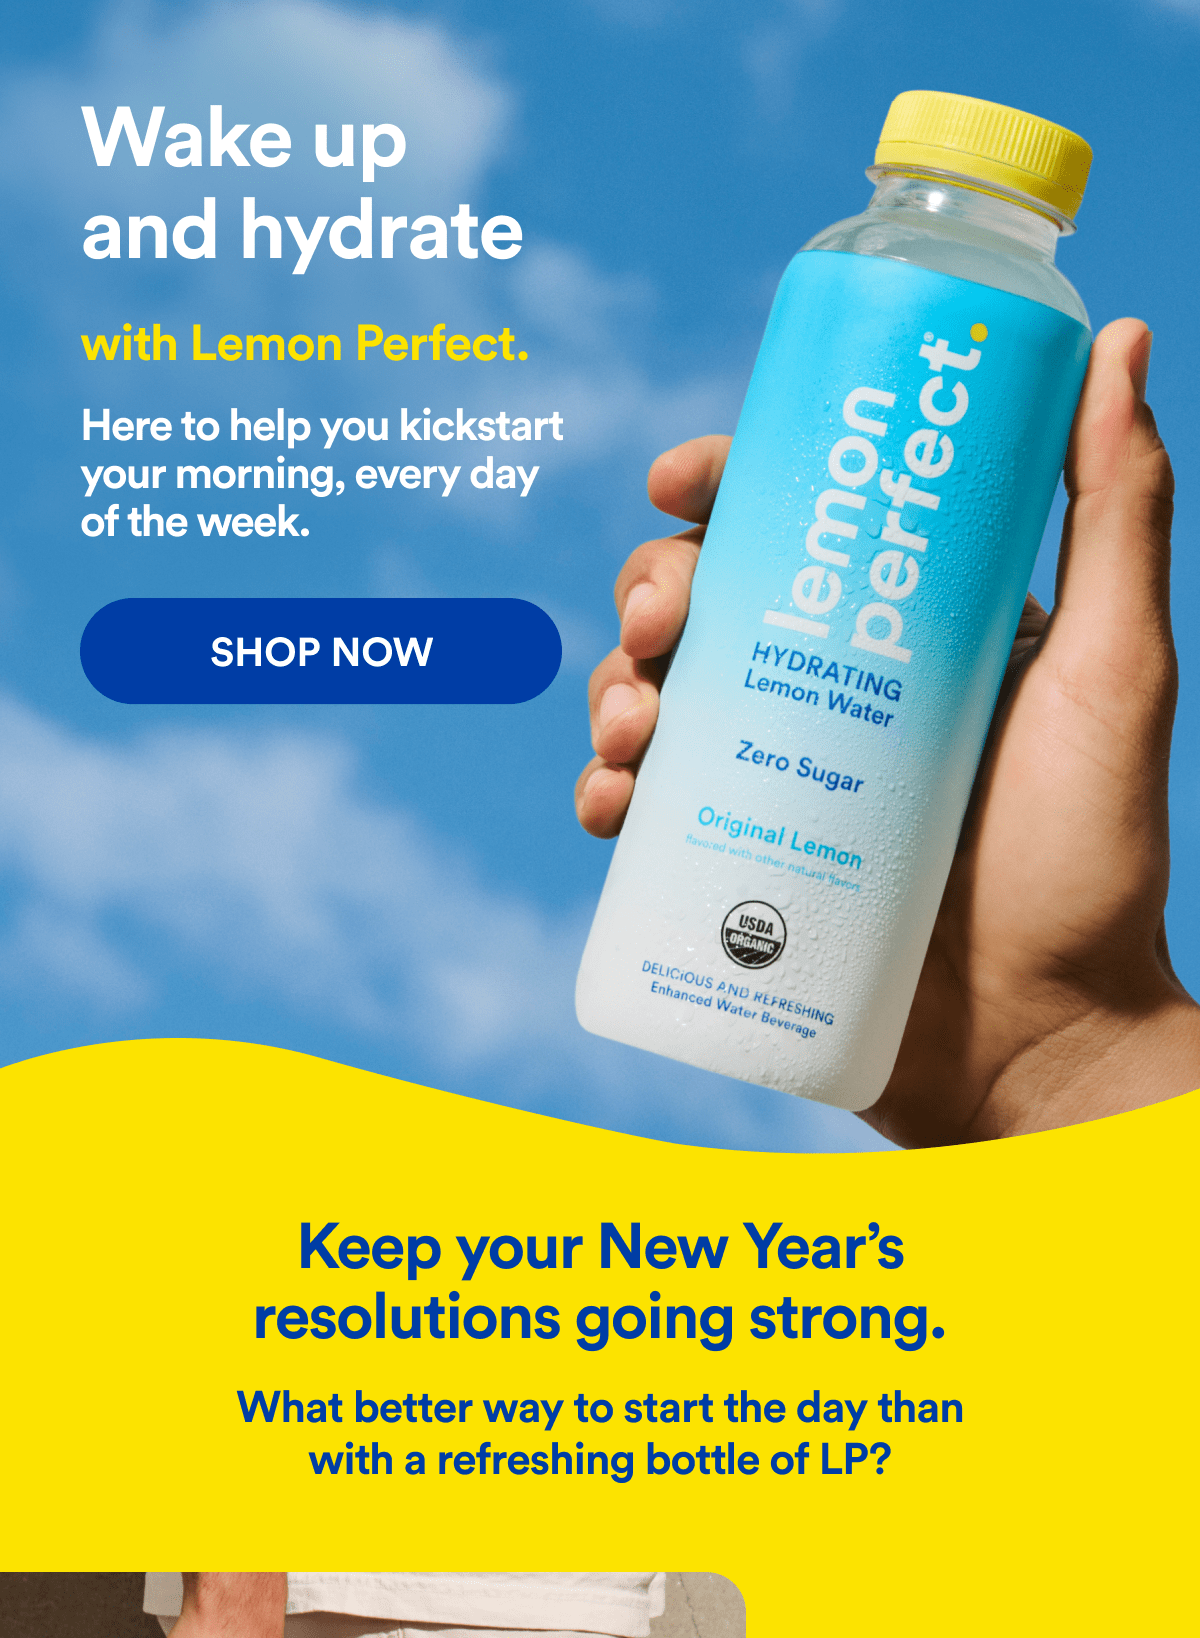 Wake up and hydrate with Lemon Perfect. | Here to help you kickstart your morning, every day of the week. | SHOP NOW | Keep your New Year’s resolutions going strong. | What better way to start the day than with a refreshing bottle of LP?